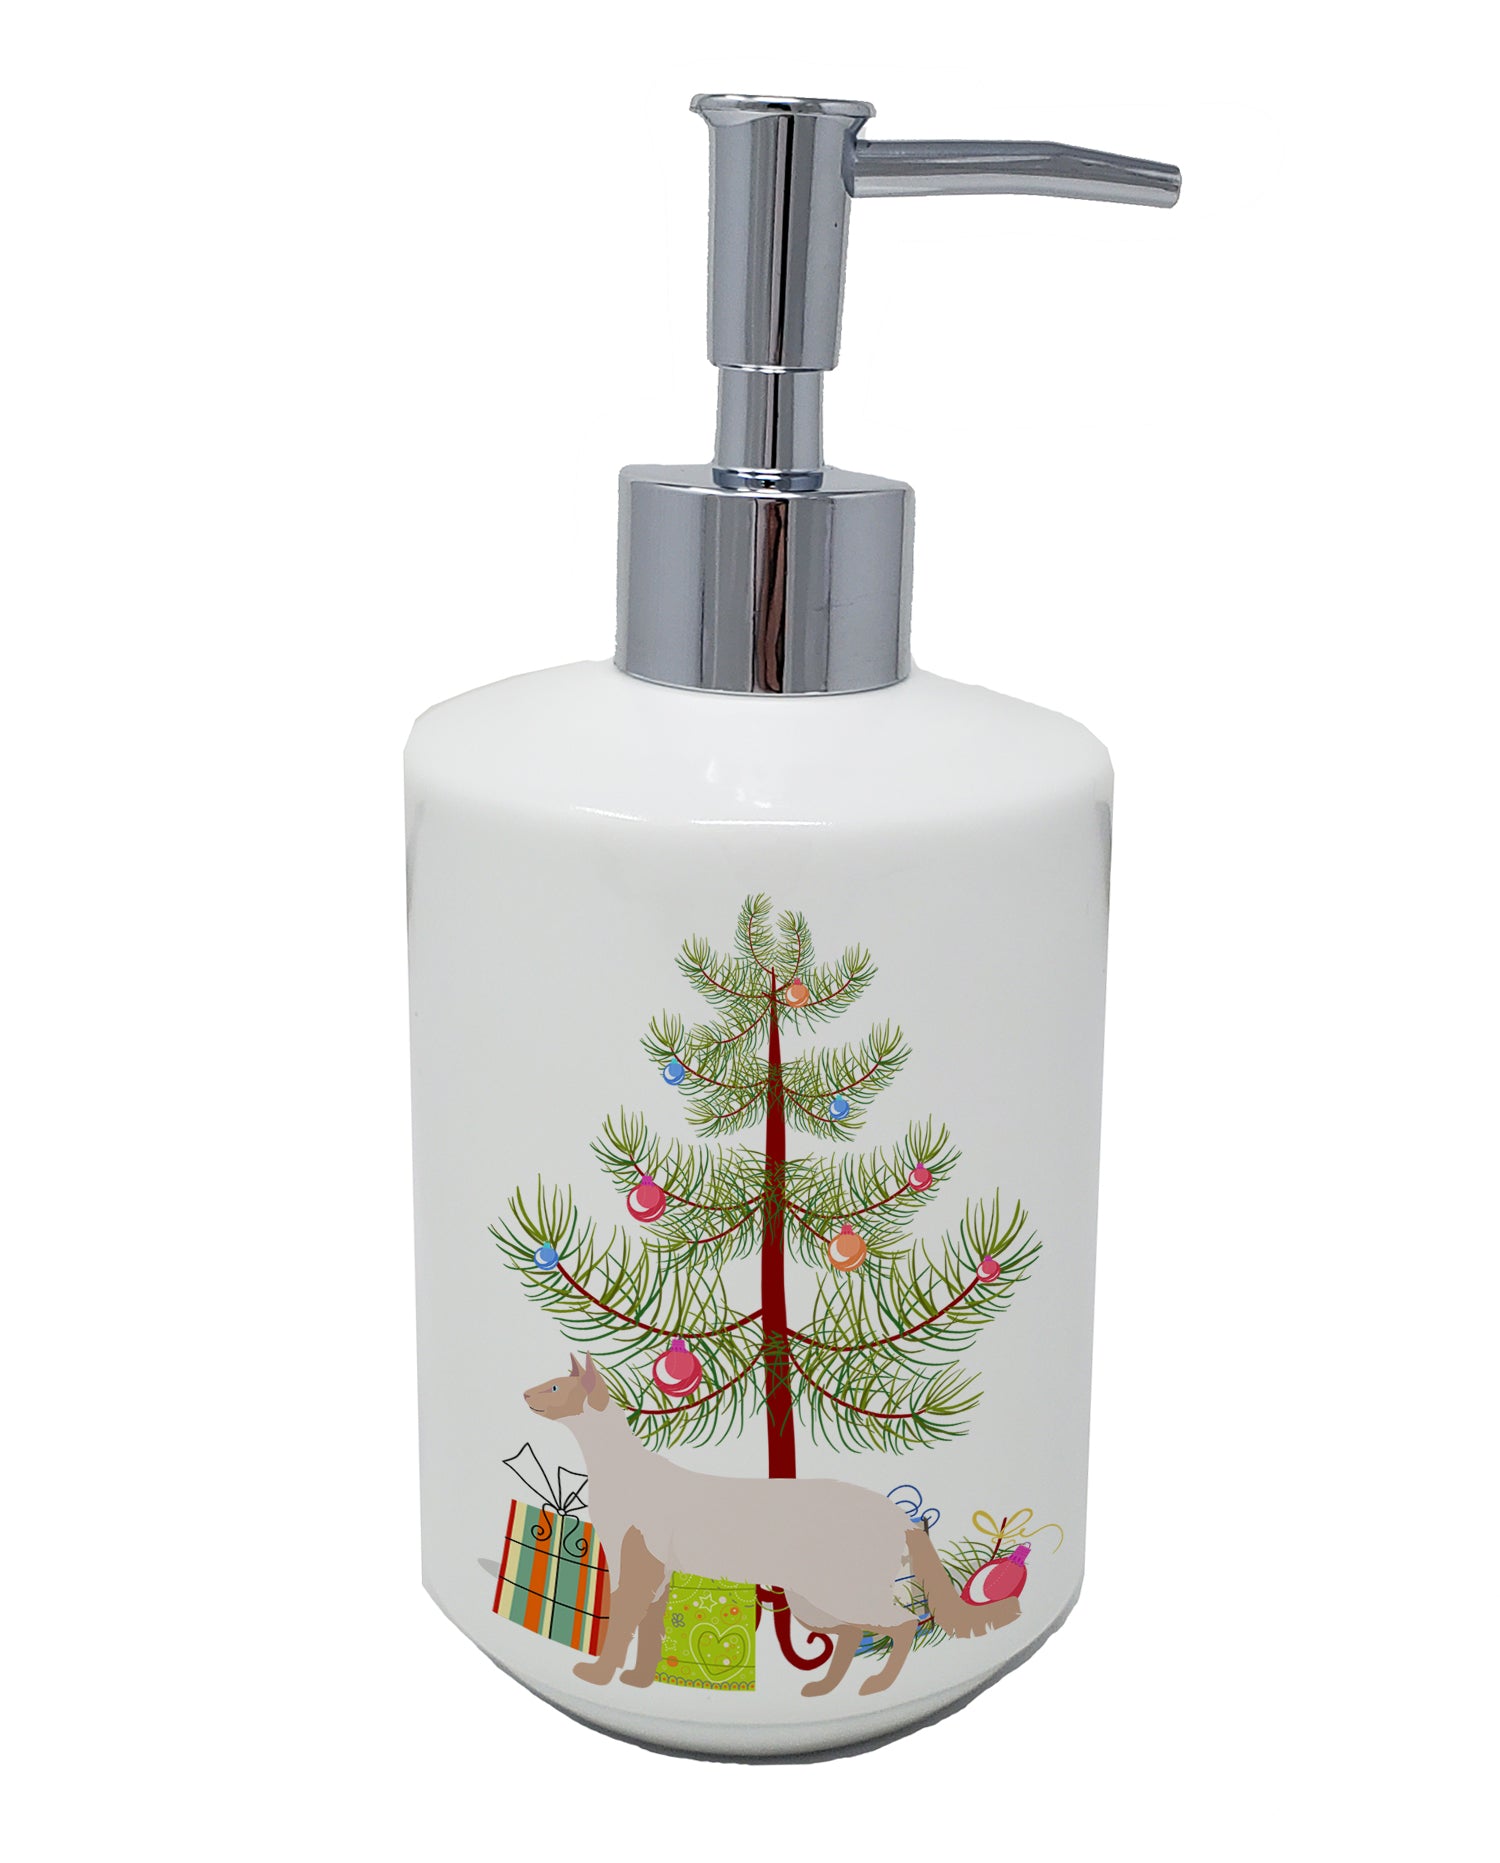 Buy this Colorpoint Longhair #2 Cat Merry Christmas Ceramic Soap Dispenser